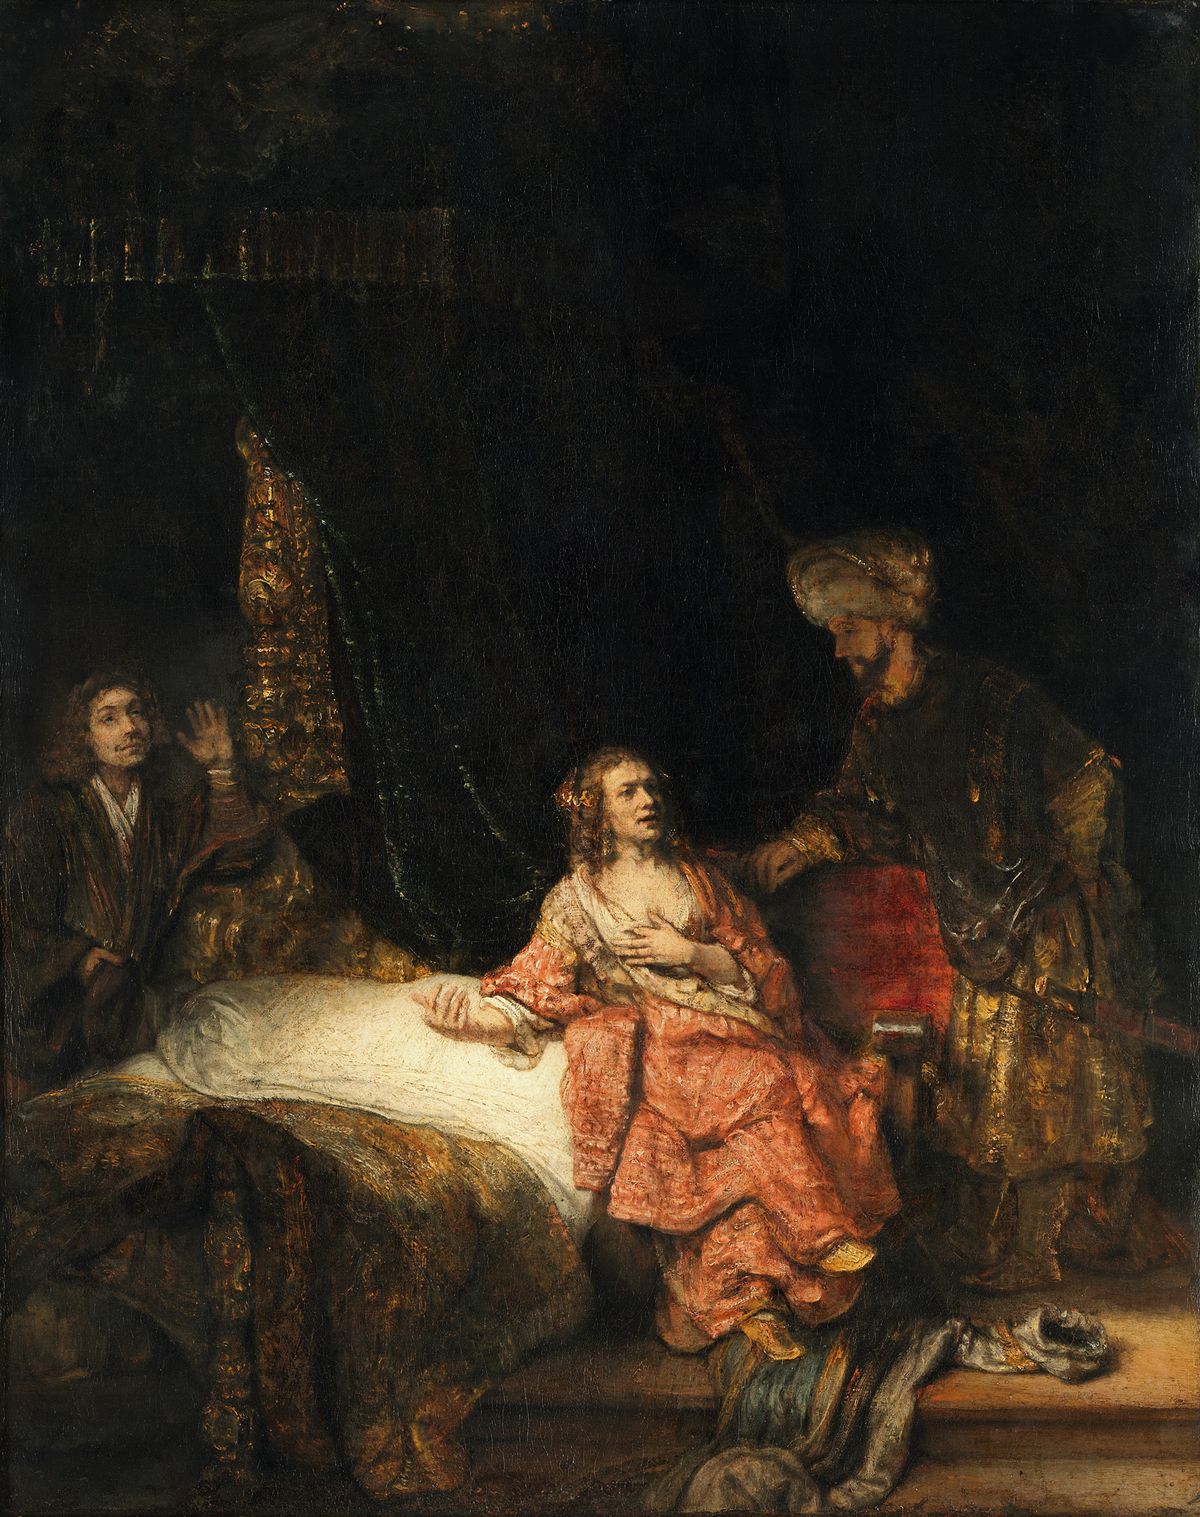 Potiphar’s Wife Accuses Joseph (1655) is one of Rembrandt's works that use theatrical elements—facial expressions, symbolic hand gestures and telling postures—to tell a story Staatliche Museen zu Berlin, Gemäldegalerie, Berlin